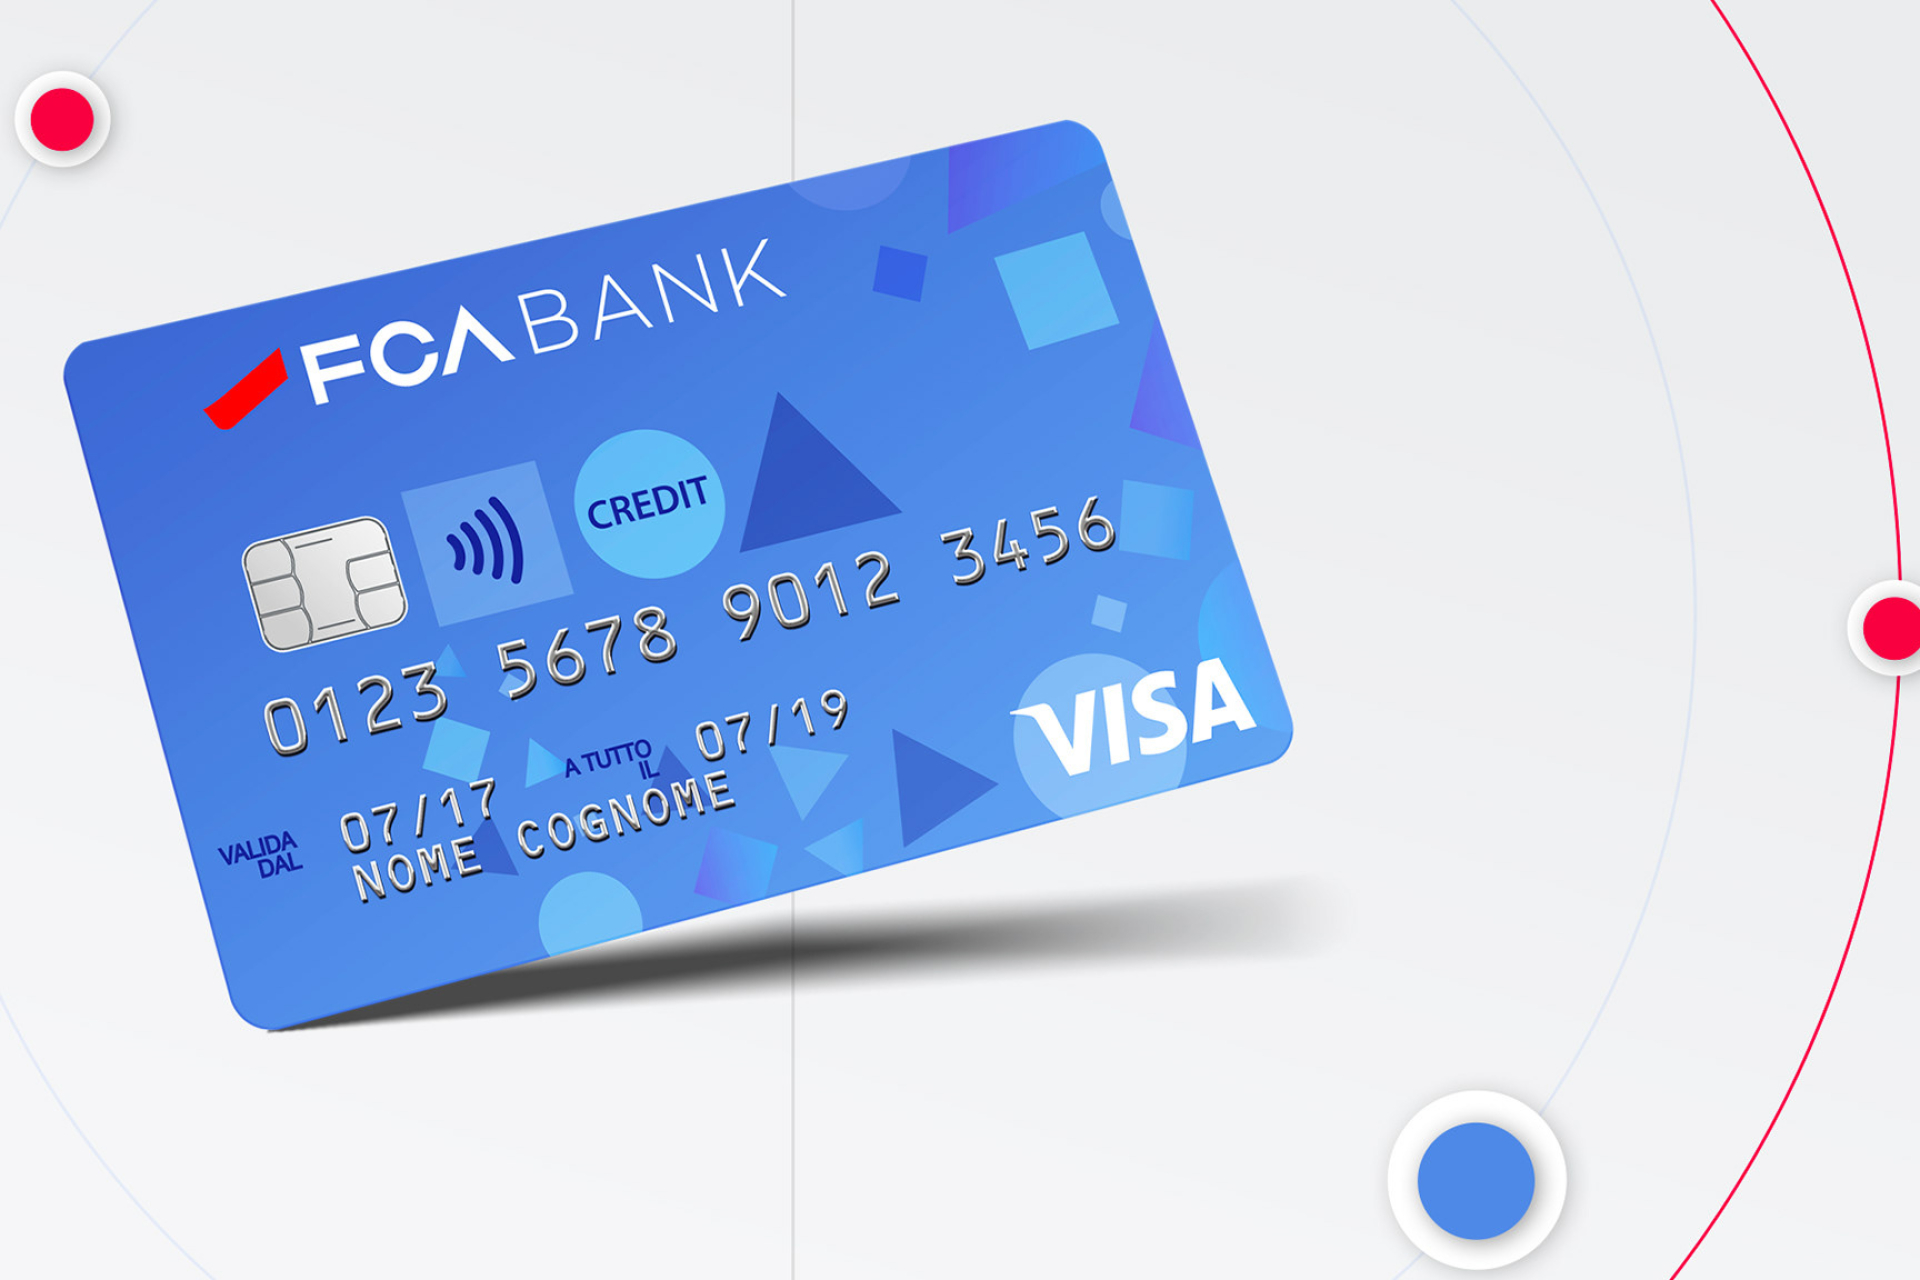 Visa (Card): FCA Bank, American brand, Electronic finance, Founded in 1958 by Dee Hock. 1920x1280 HD Background.